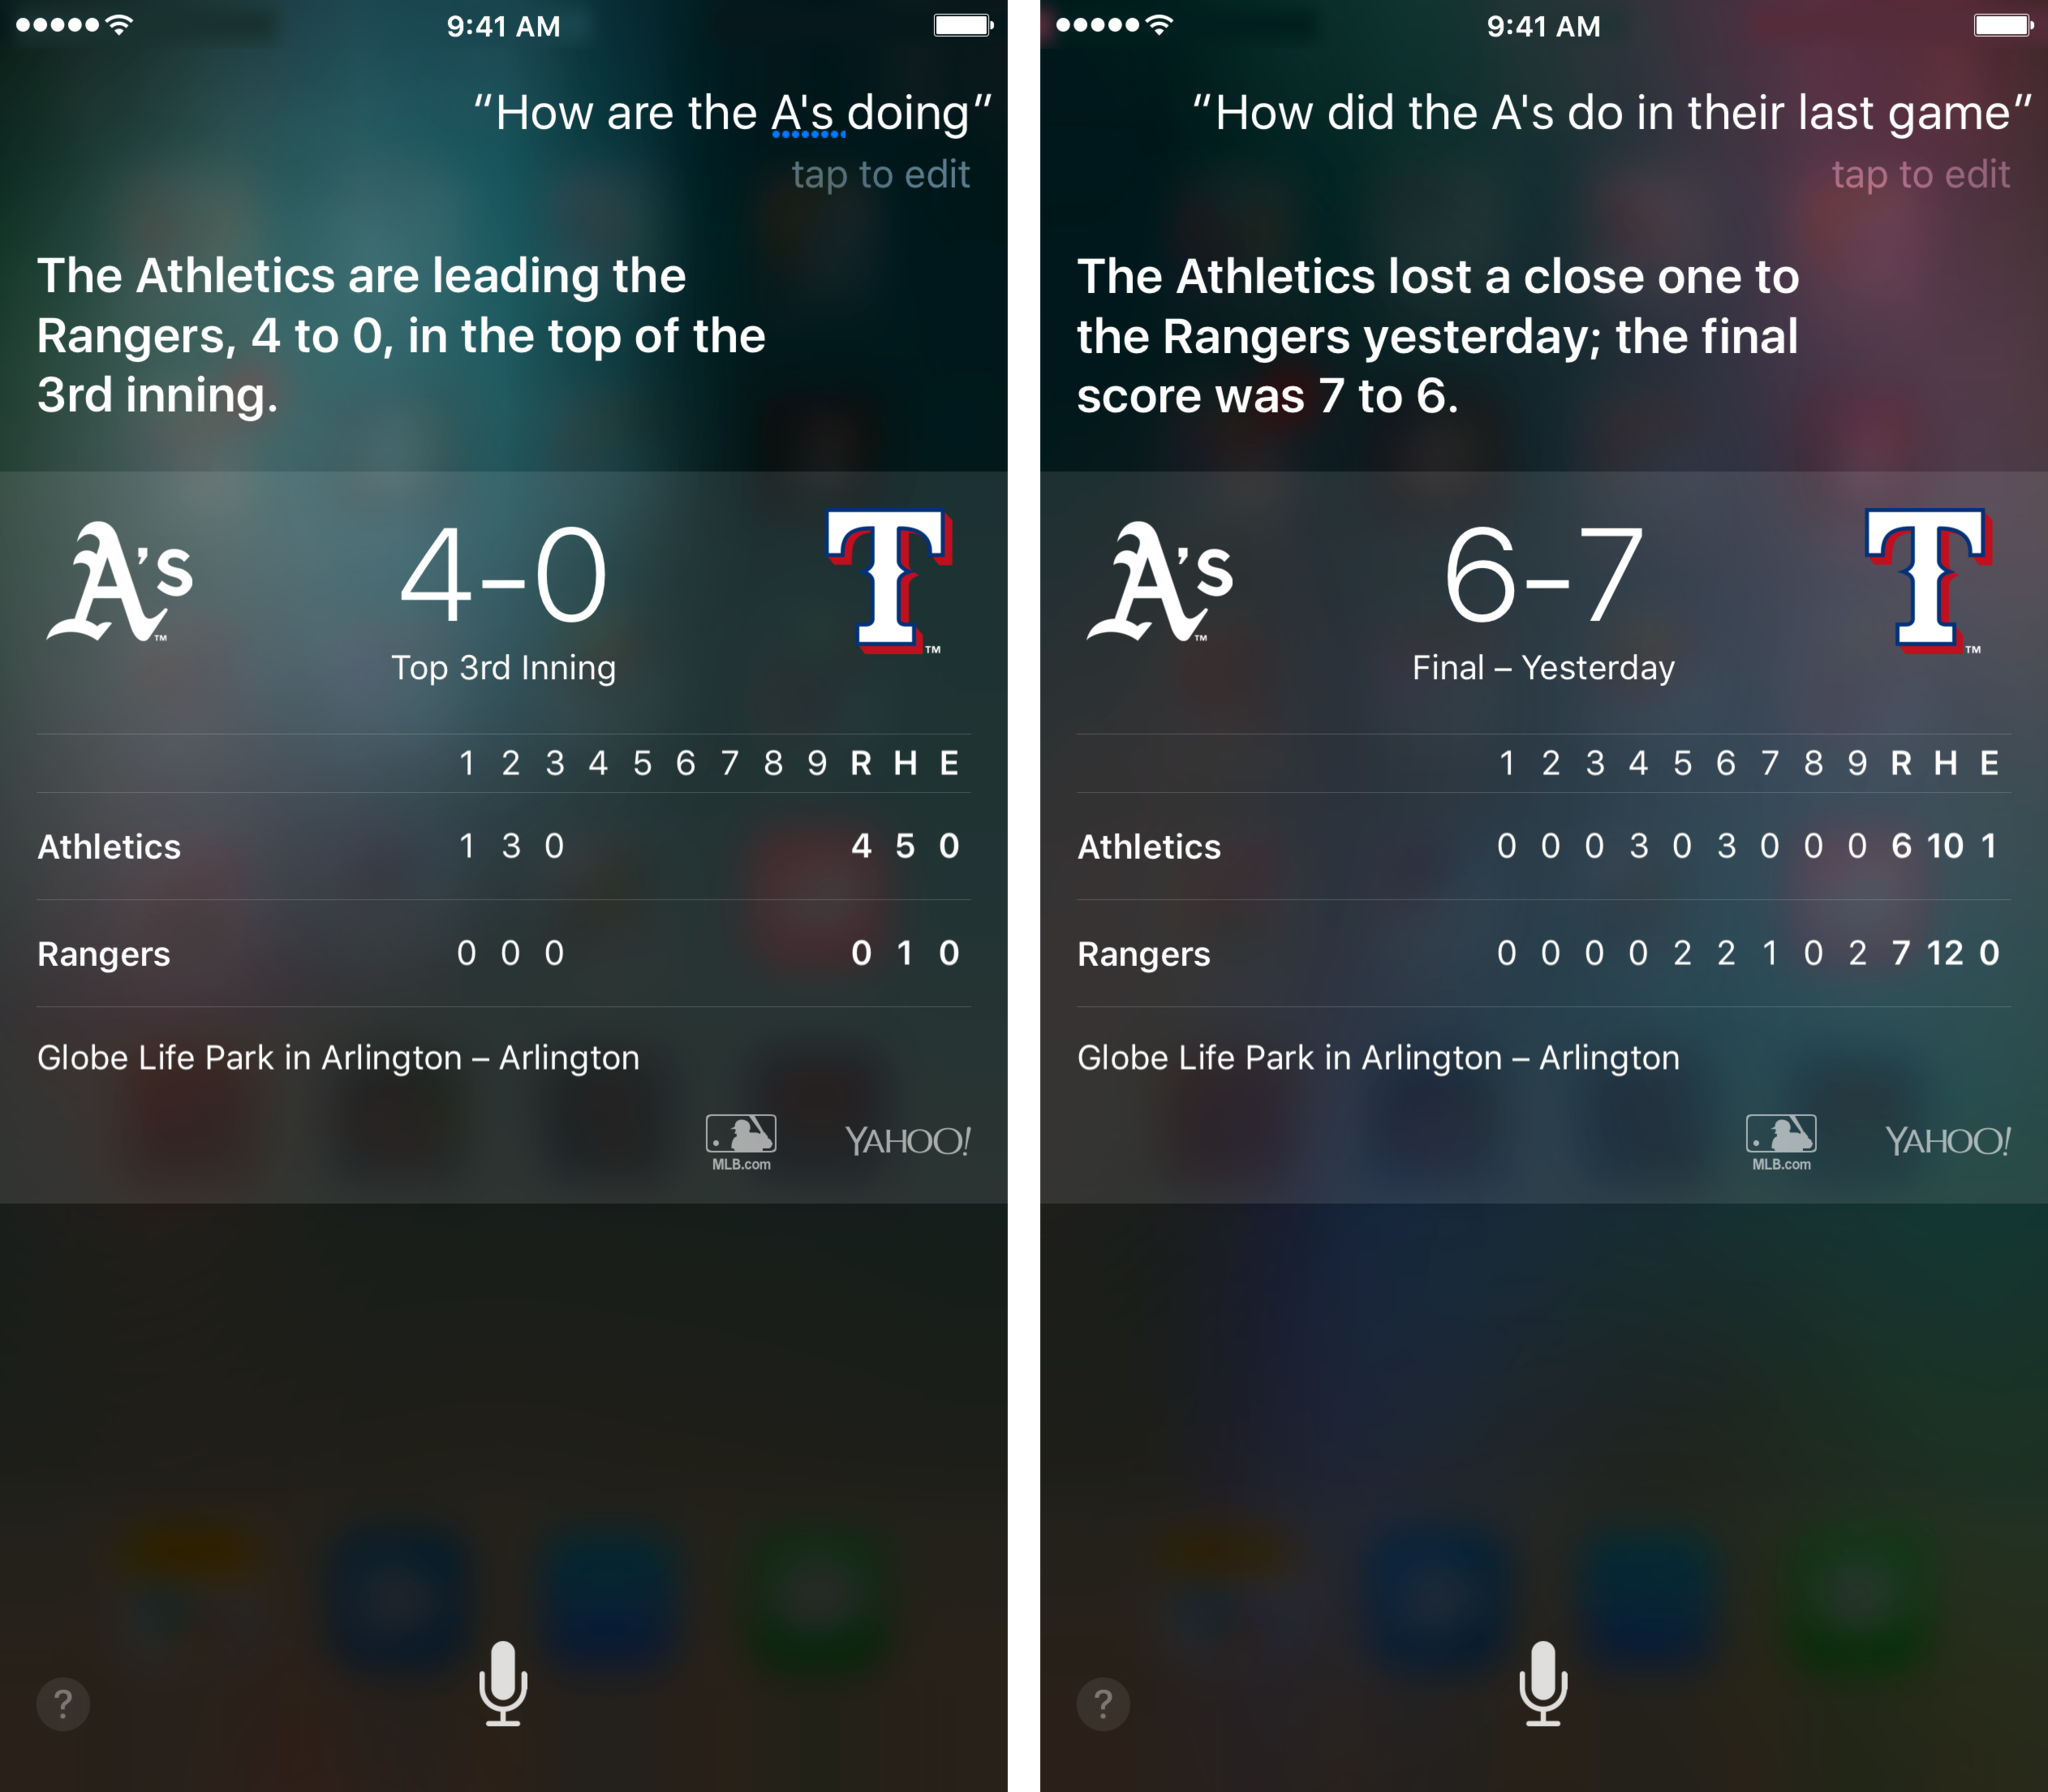 Ask Siri the score of the game